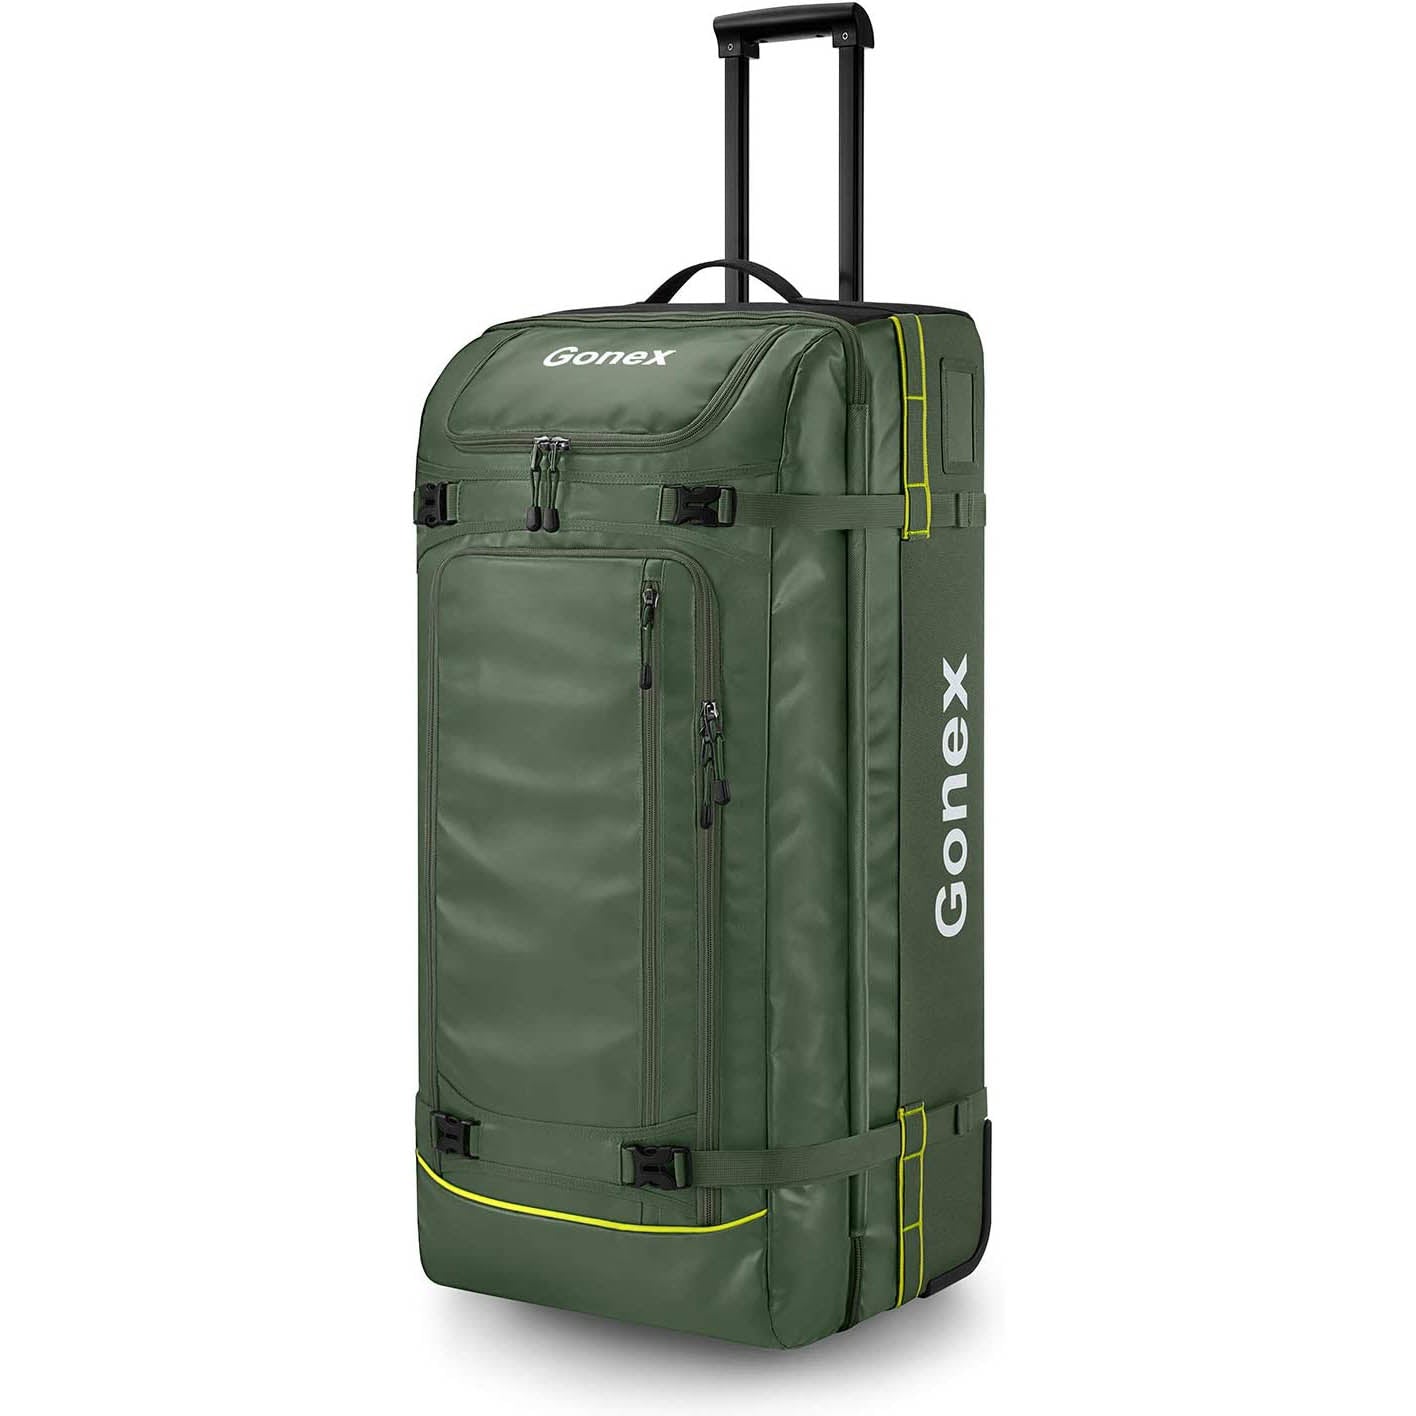 Gonex 33 Inch Rolling Duffle Bags with Wheels